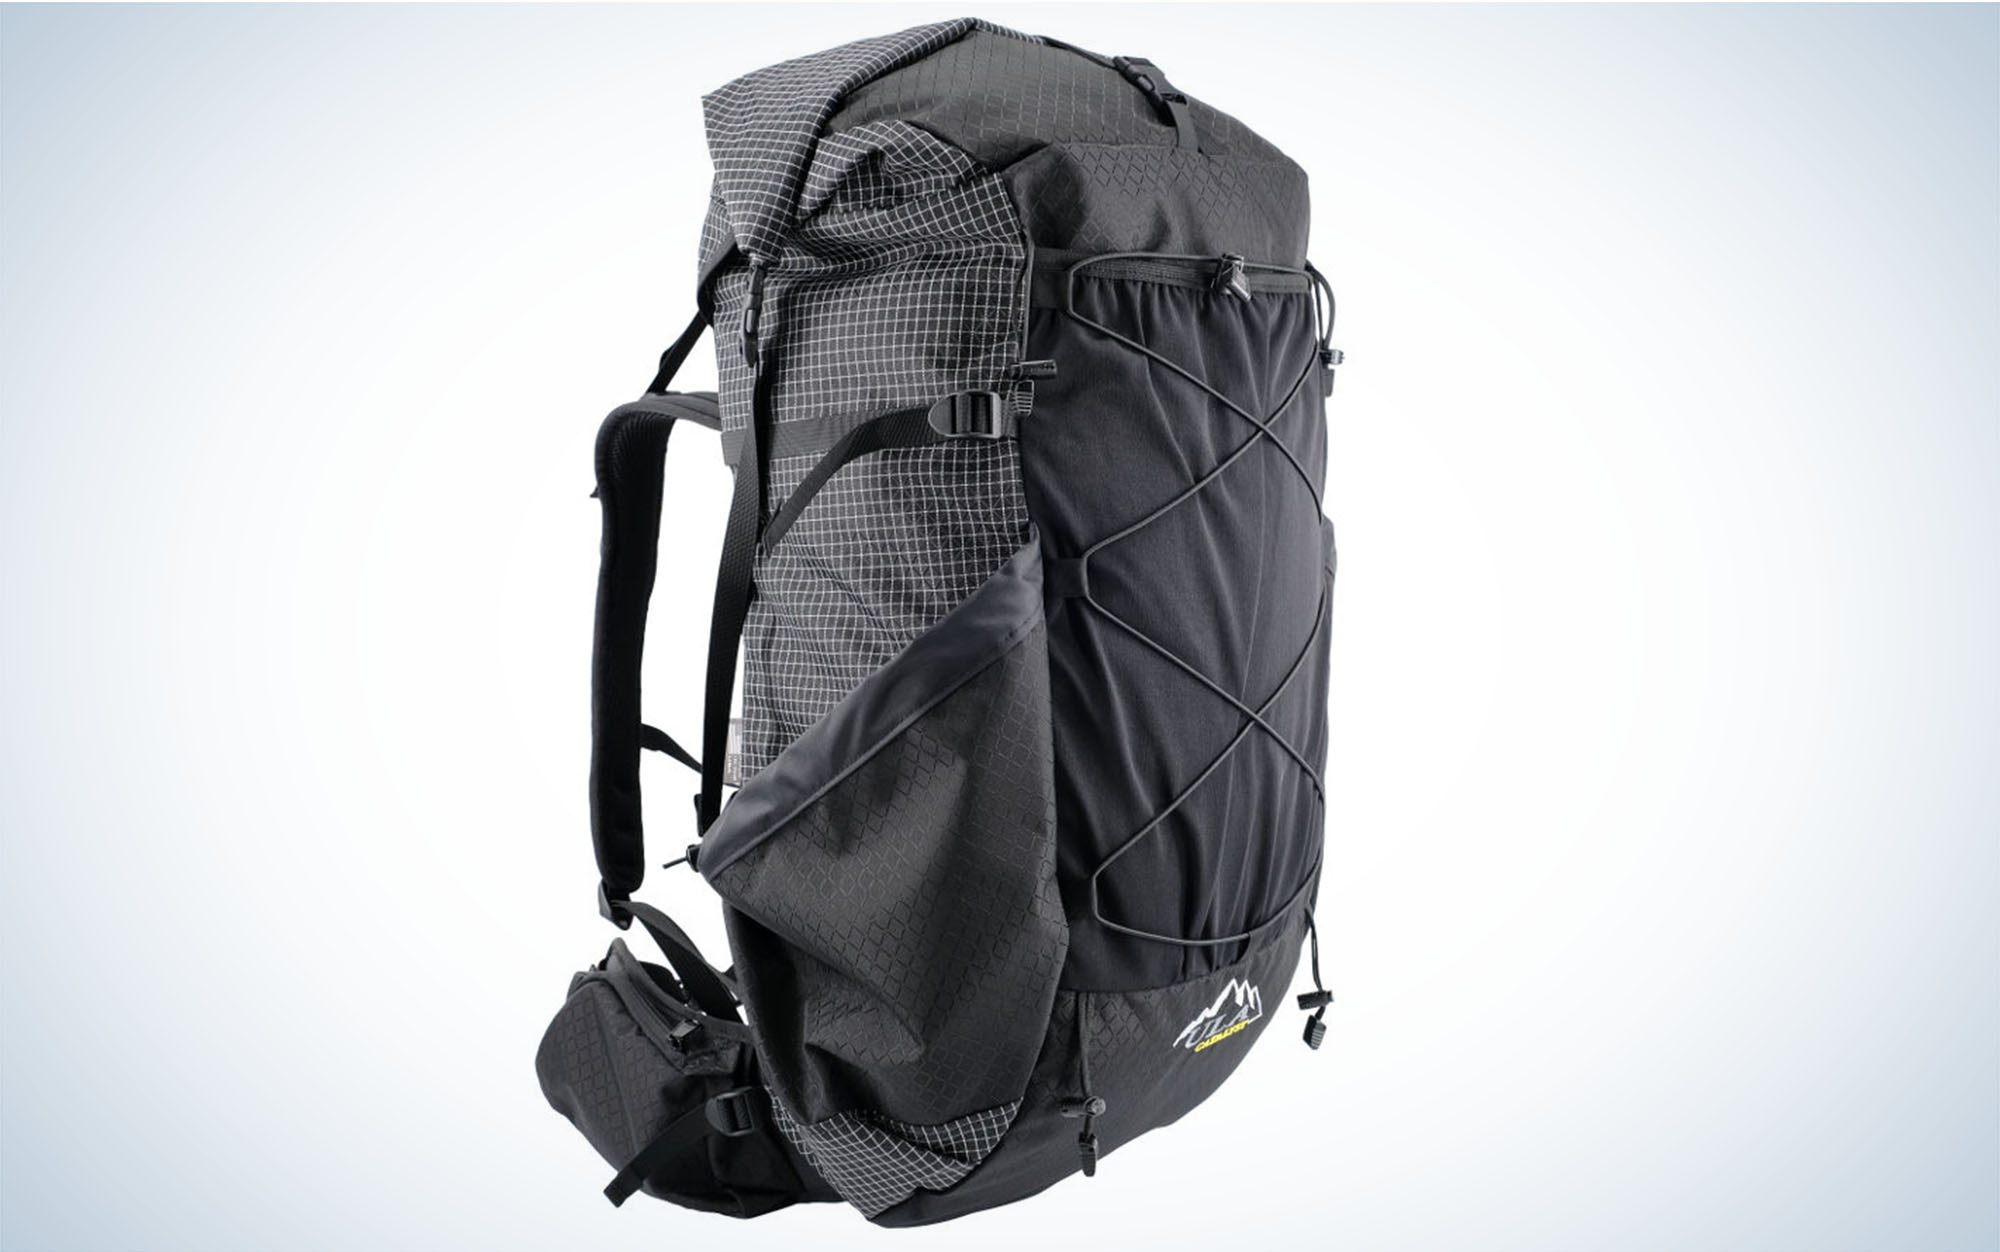 The ULA CatalystÂ is one of the best ultralight backpacks.